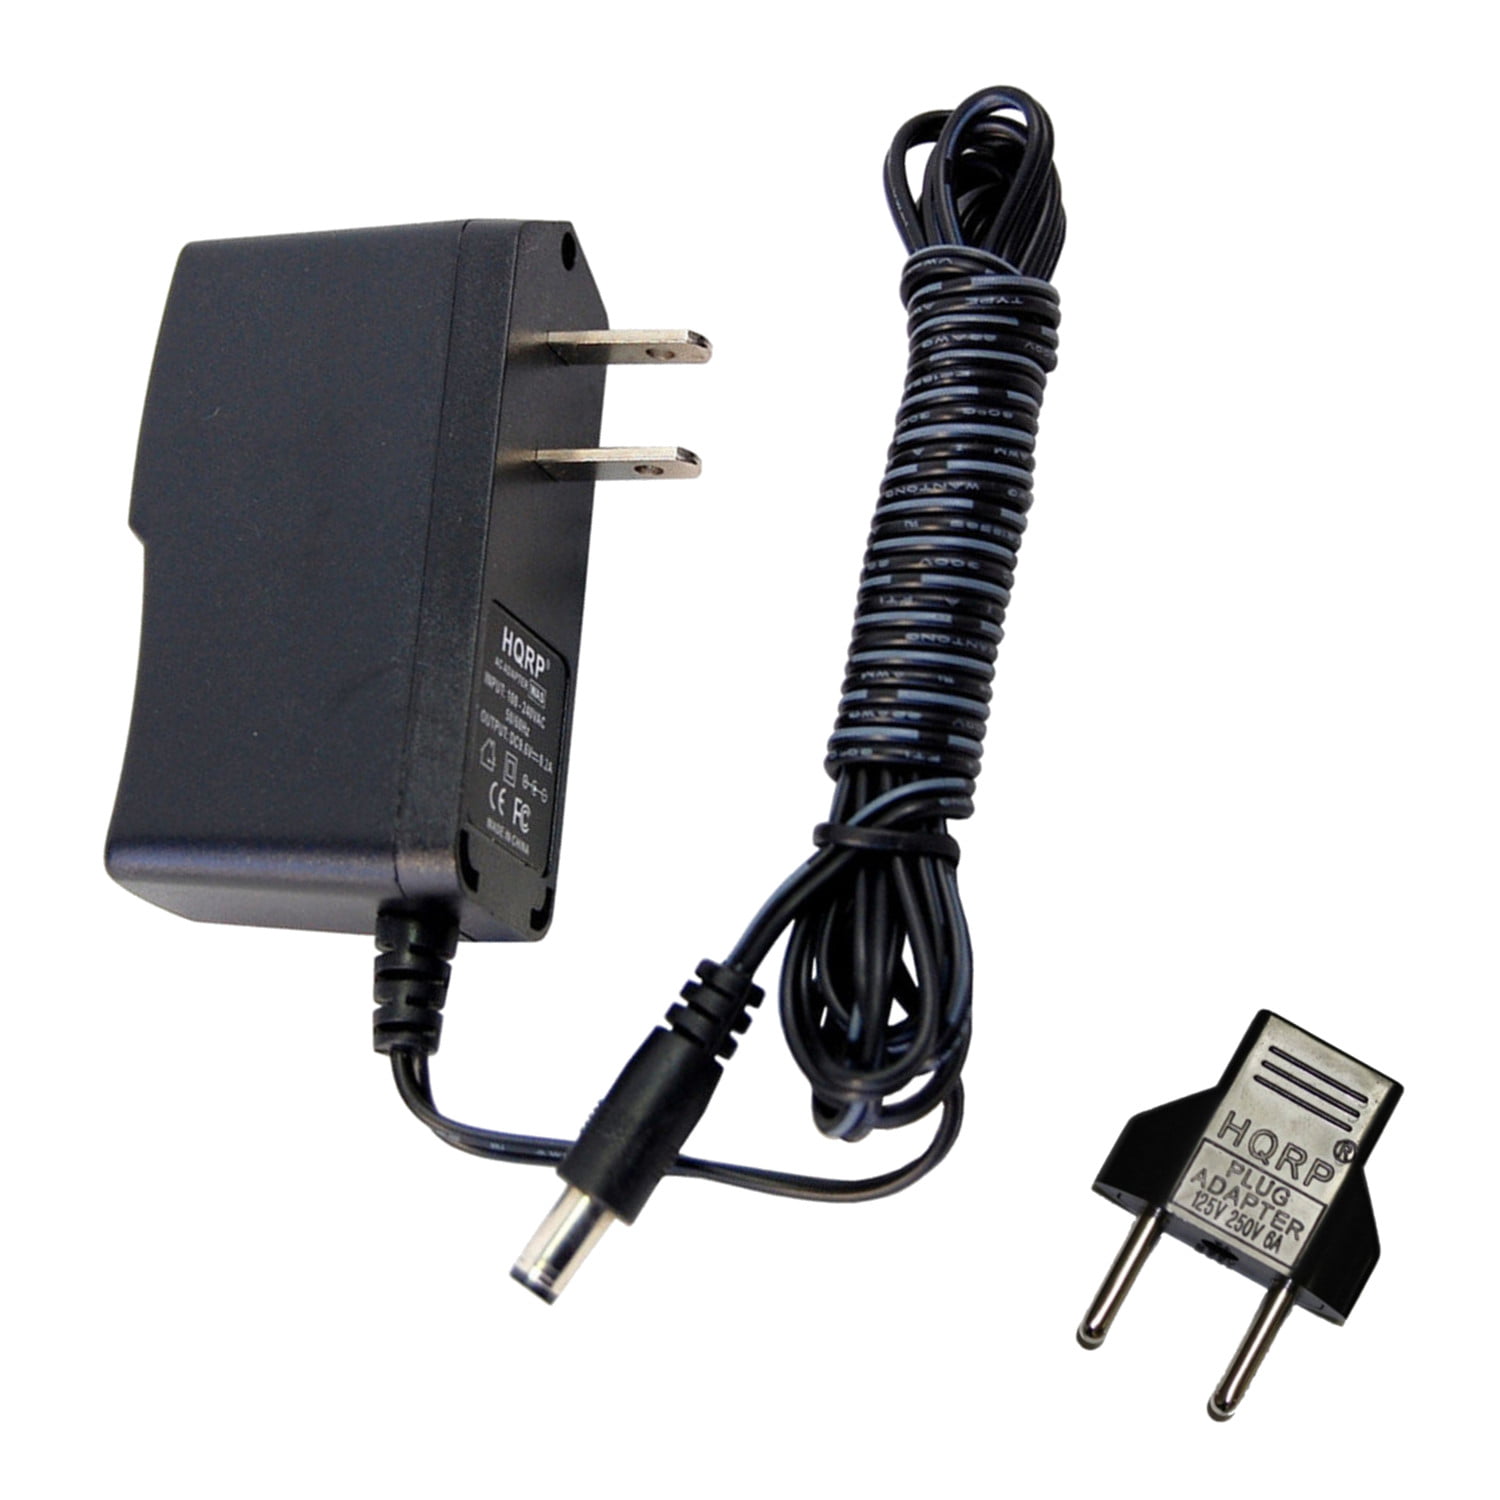 HQRP AC Adapter Power Supply for Boss DR-3 DR. RHYTHM DR-5 DR. RHYTHM  SECTION Guitar Effects pedals Replacement HQRP Euro Plug Adapter 